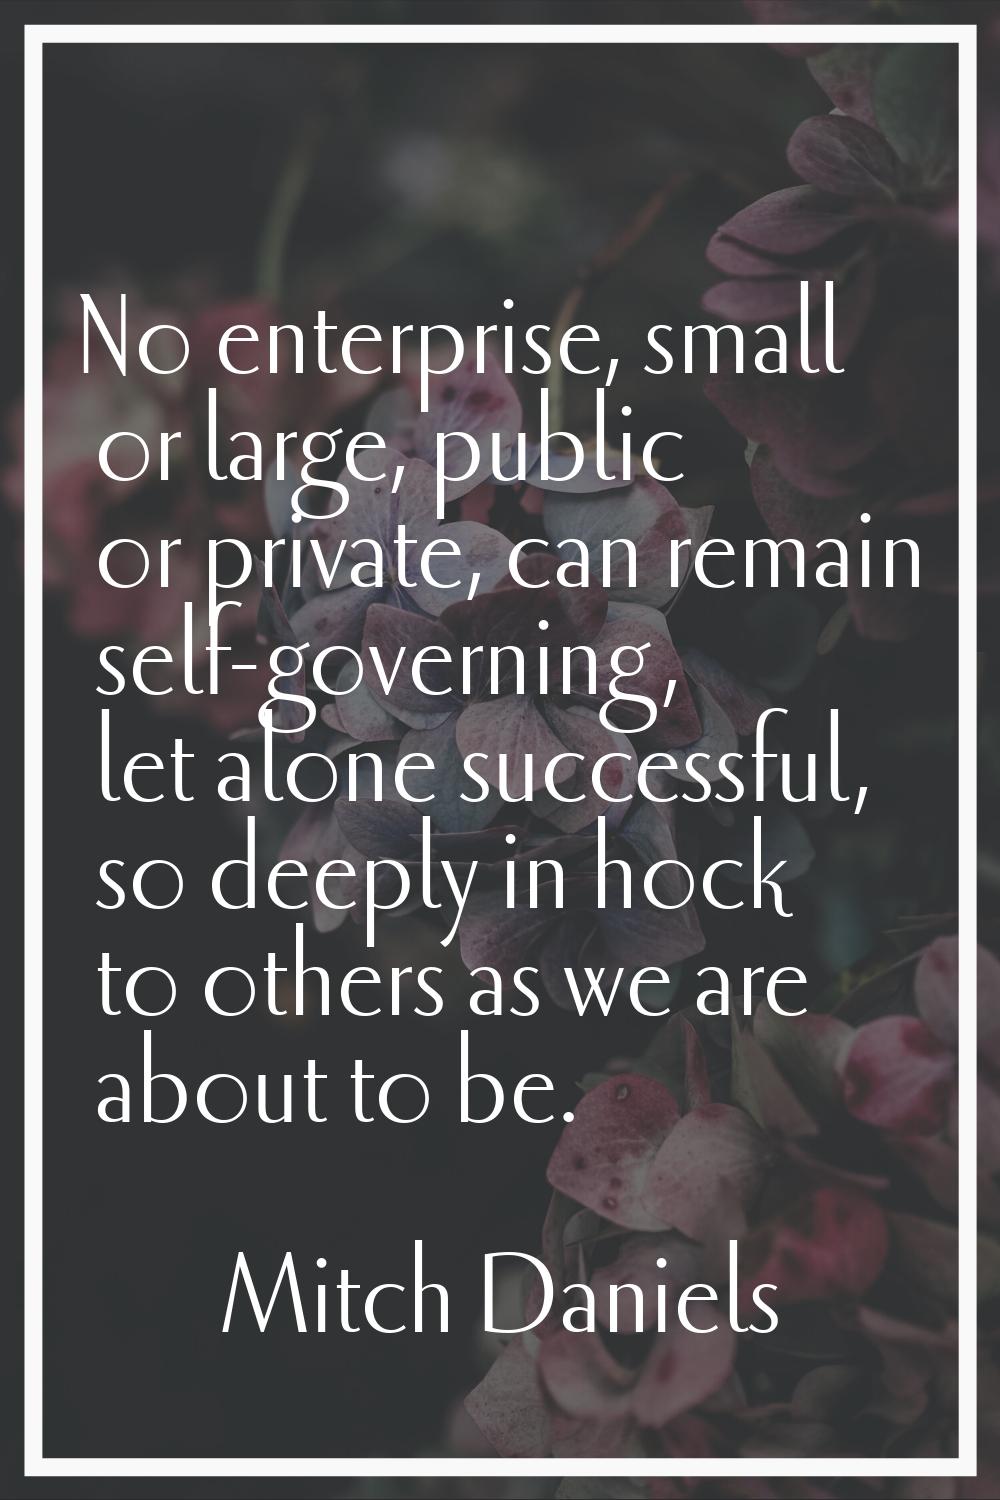 No enterprise, small or large, public or private, can remain self-governing, let alone successful, 